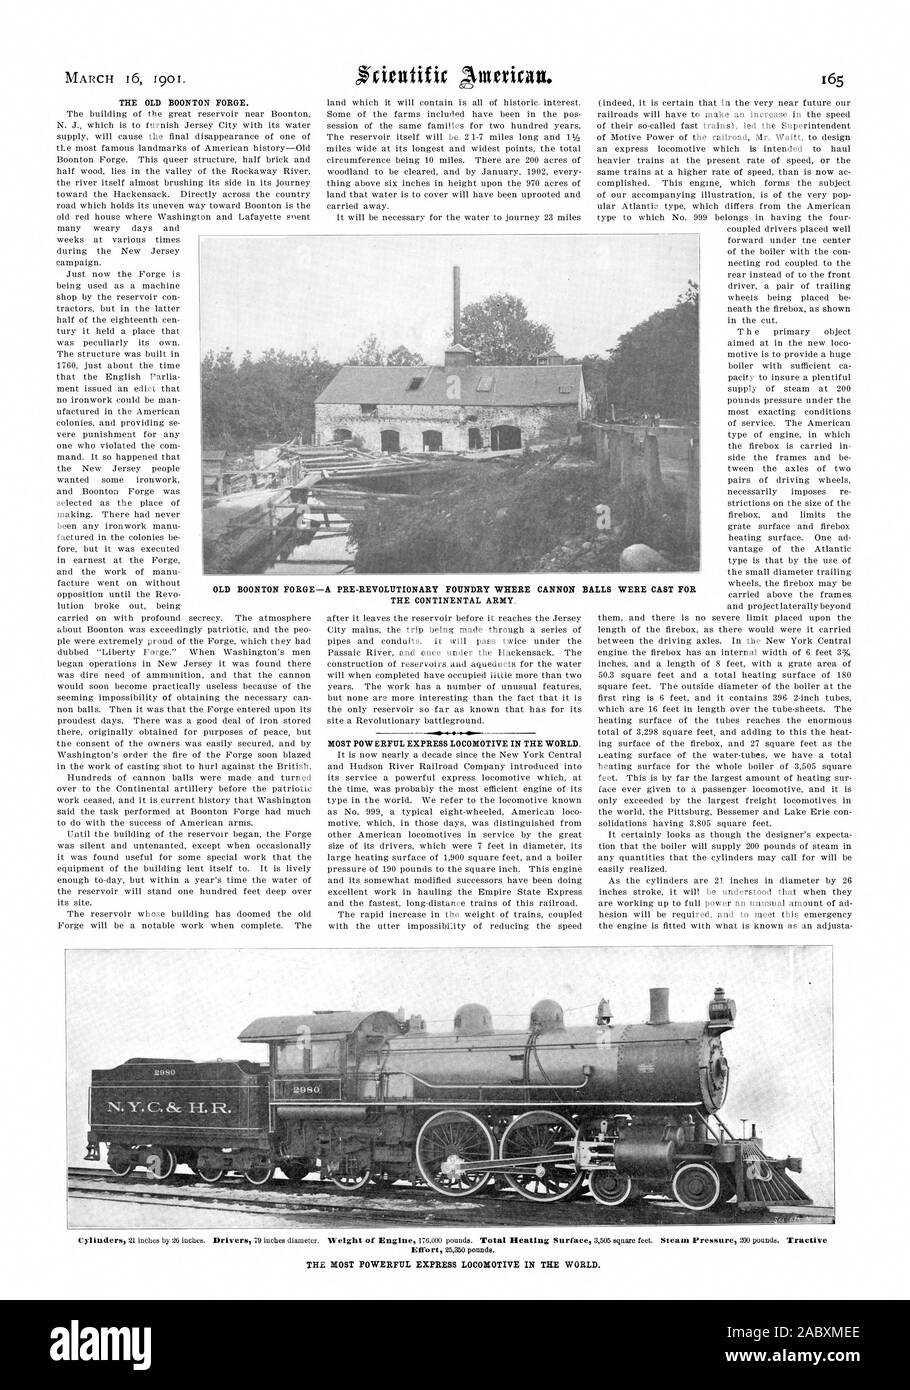 HOST POWERFUL EXPRESS LOCOMOTIVE IN THE WORLD. OLD BOONTON FORGE—A PRE-REVOLUTIONARY FOUNDRY WHERE THE CONTINENTAL ARMY. CANNON BALLS WERE CAST FOR THE HOST POWERFUL EXPRESS LOCOMOTIVE IN THE WORLD., scientific american, 01-03-16 Stock Photo